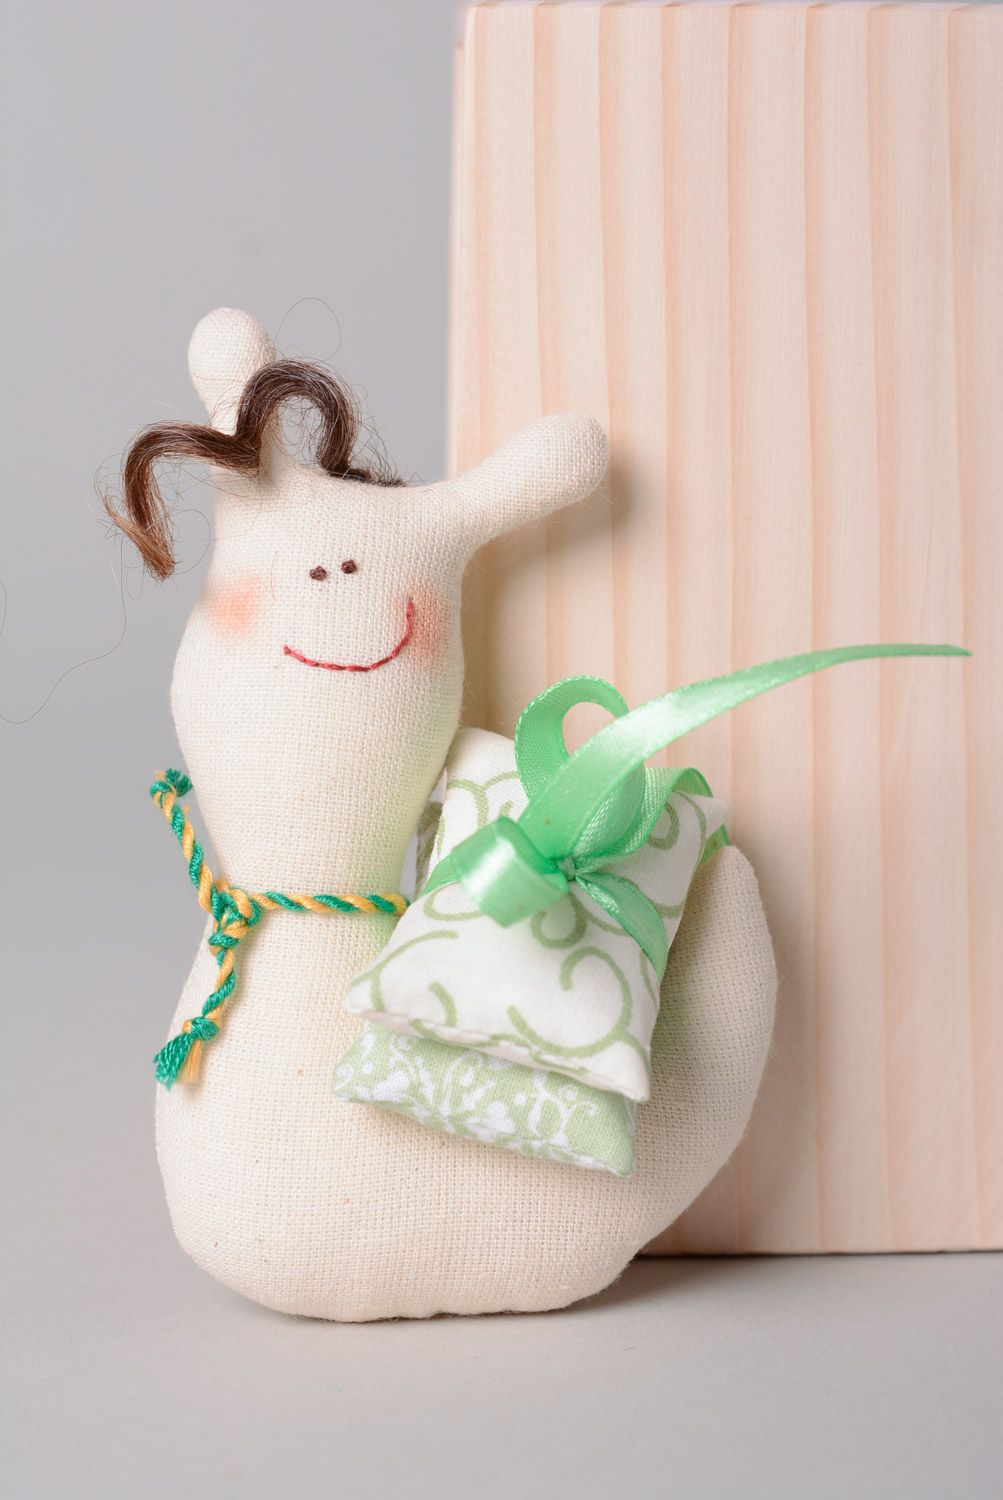 Handmade soft toy sewn of natural fabrics in the shape of small funny snail  photo 1